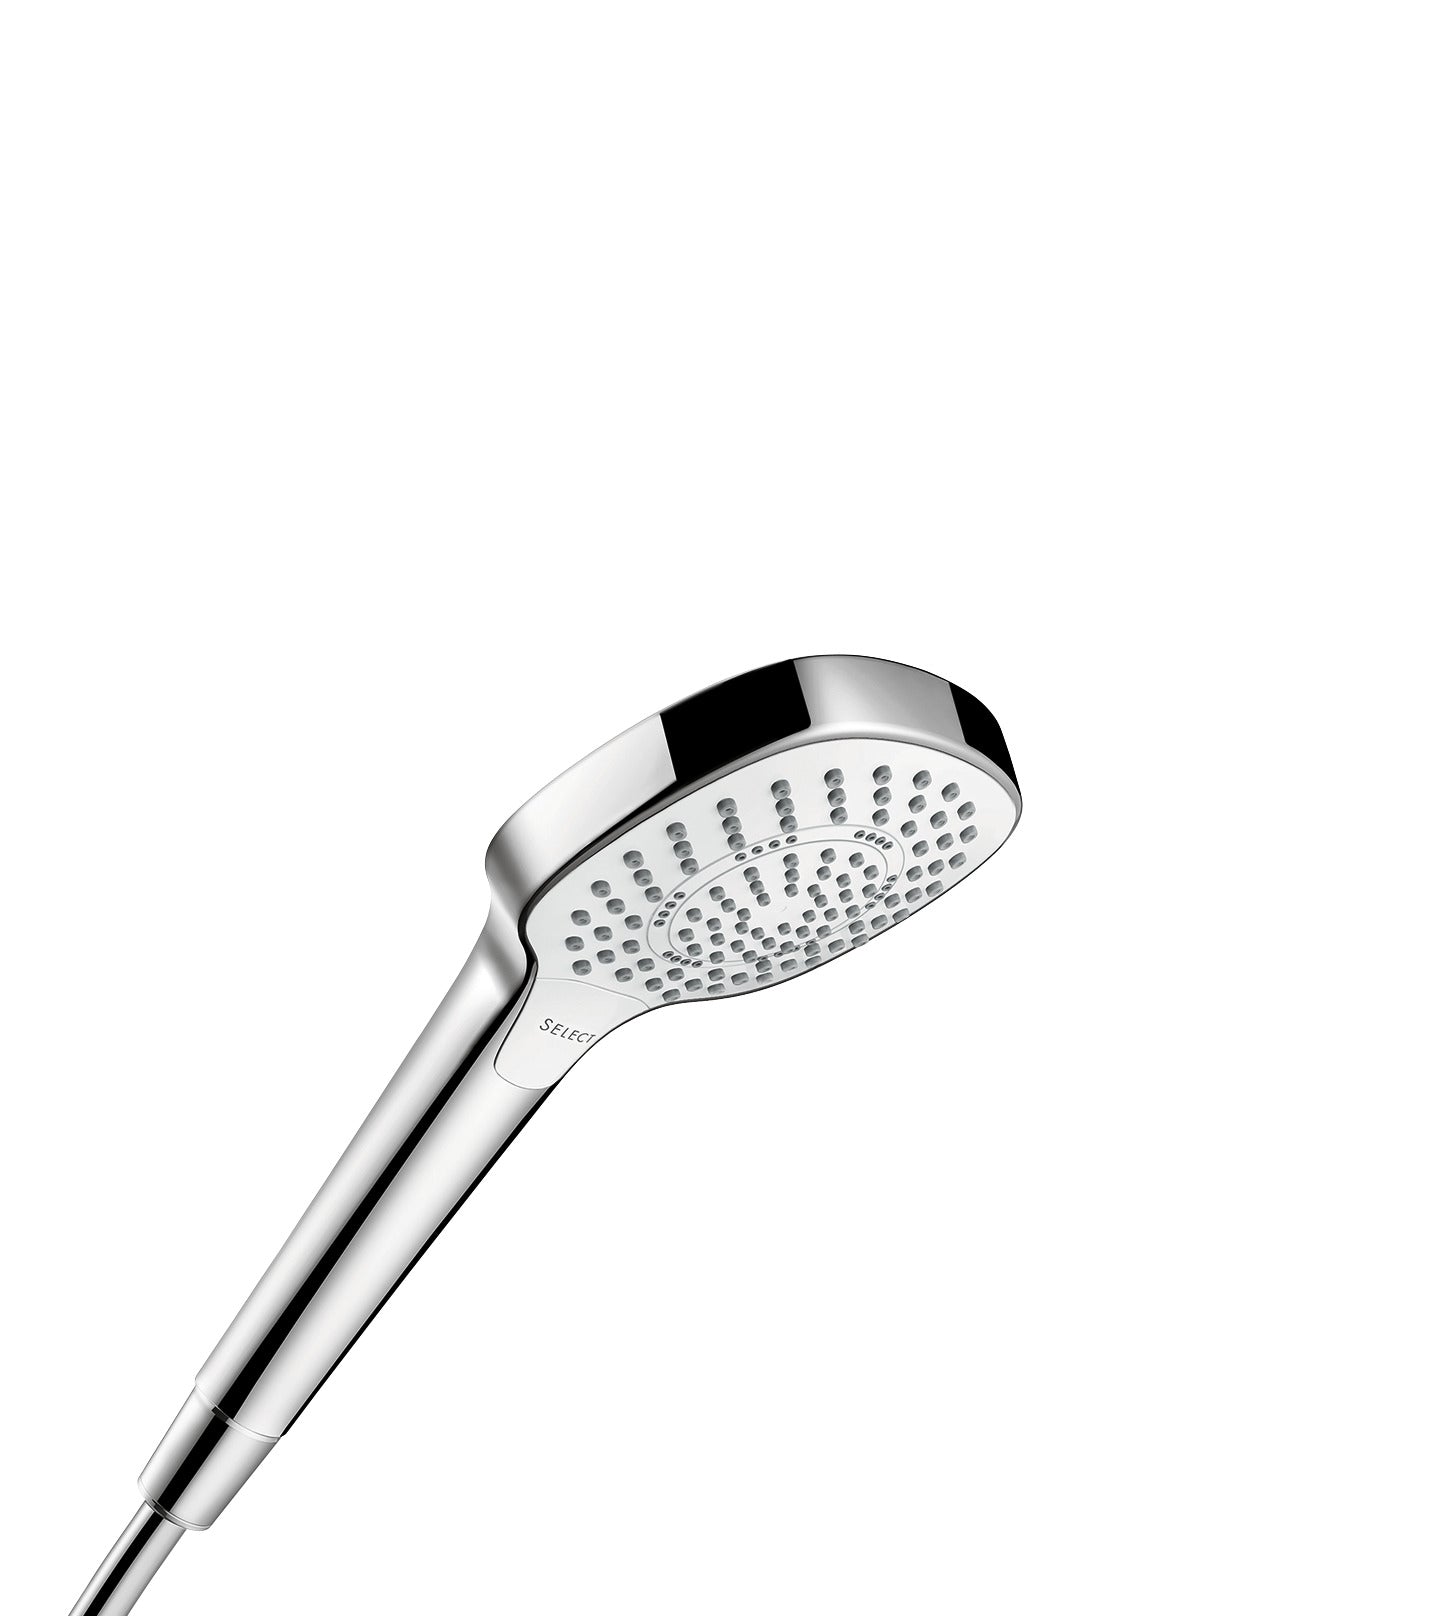 HANSGROHE 04948400 Croma Select E Modern Handshower 2.5 GPM